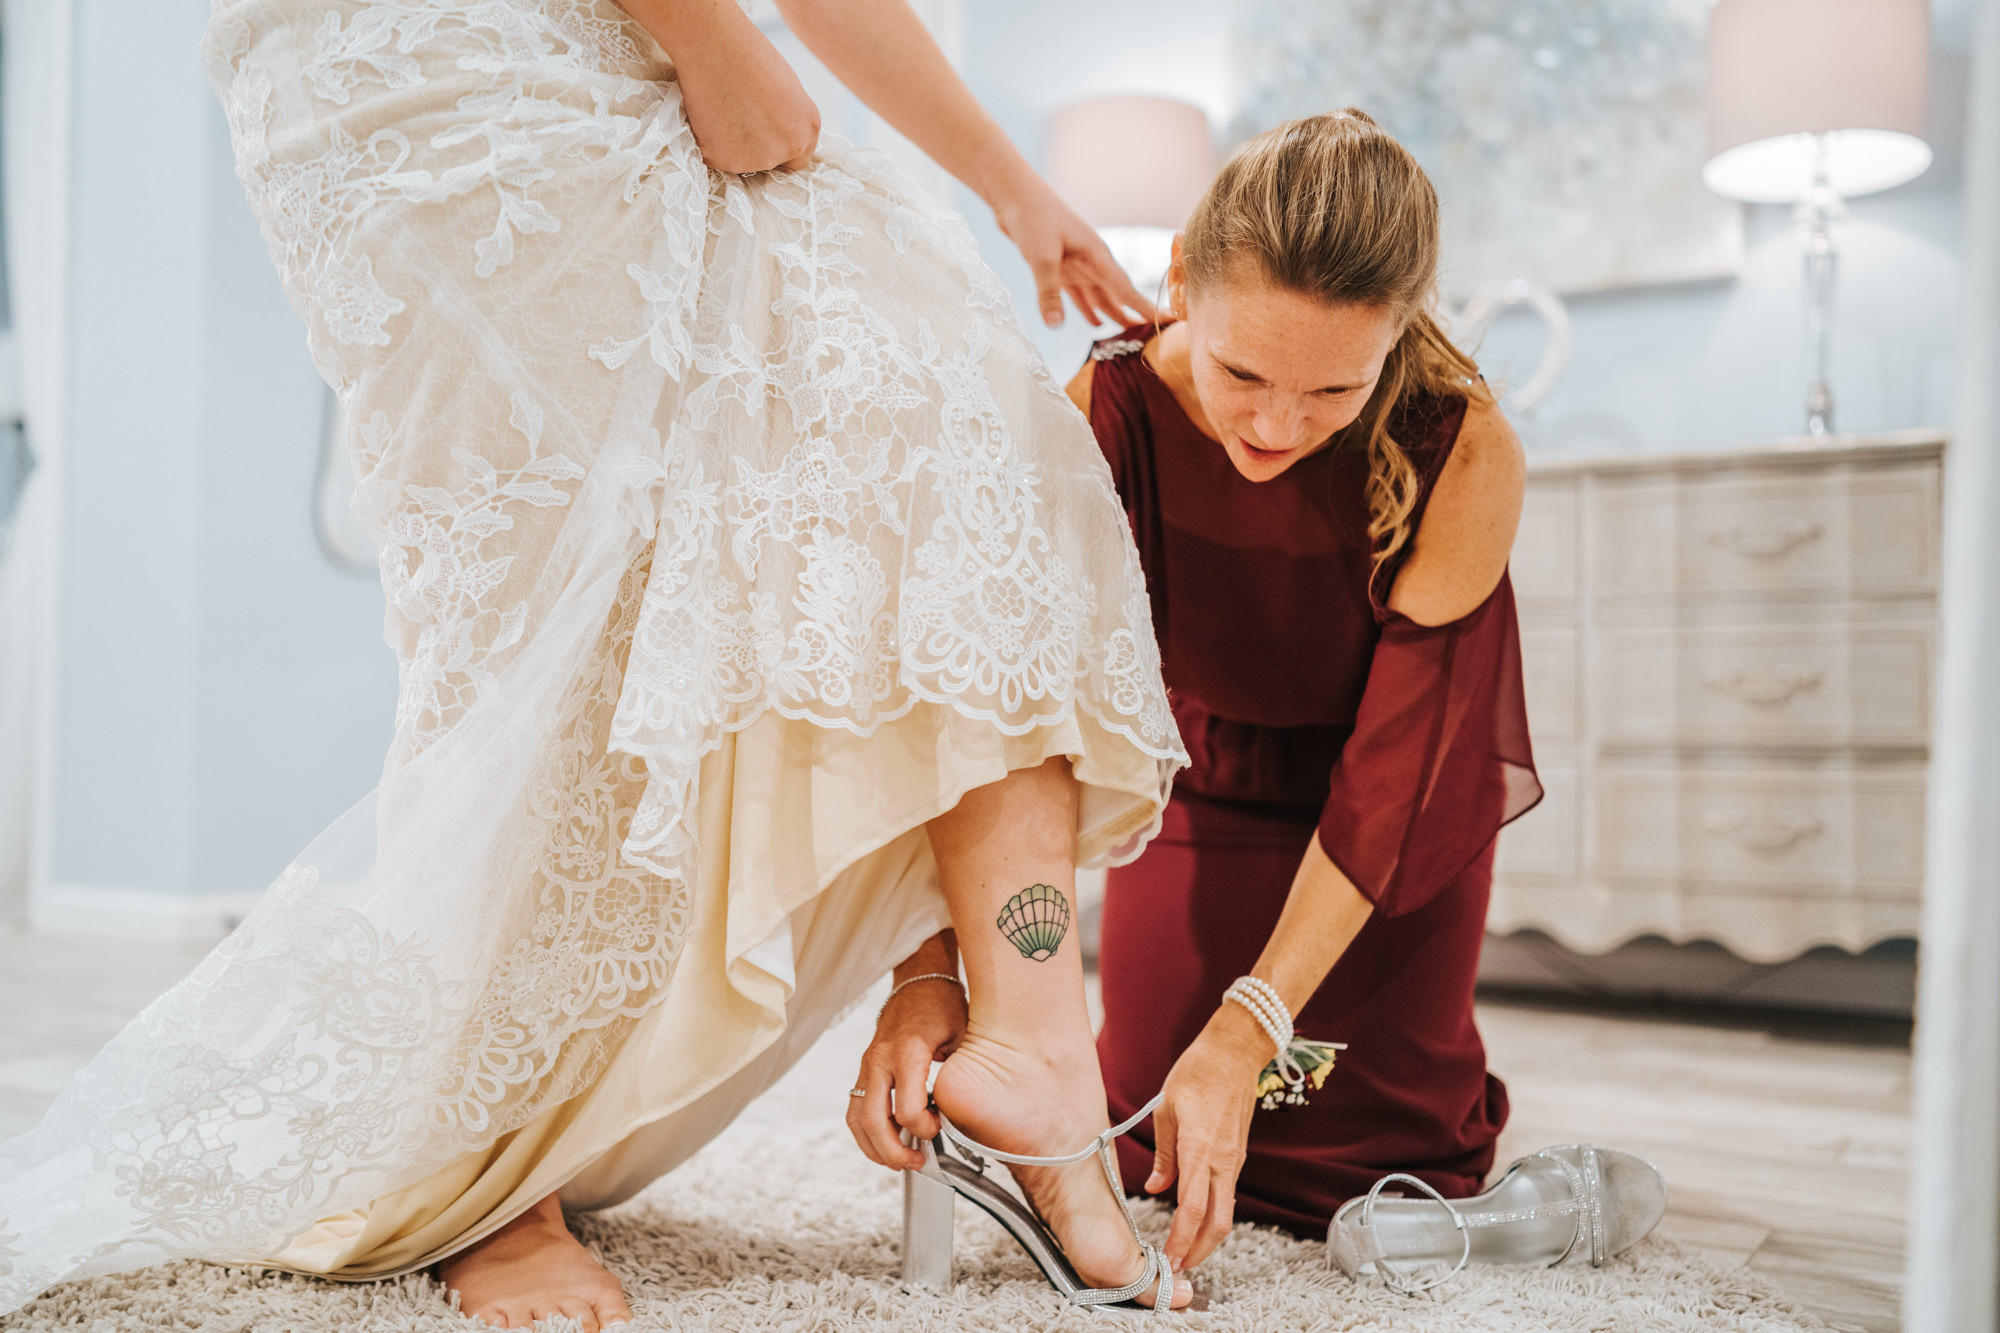 Bride Getting Dressed and Ready with Bridesmaid Putting on Shoes | Long Burgundy Chiffon Bridesmaid Dress | V Neck Champagne Lace Bridal Gown Wedding Dress